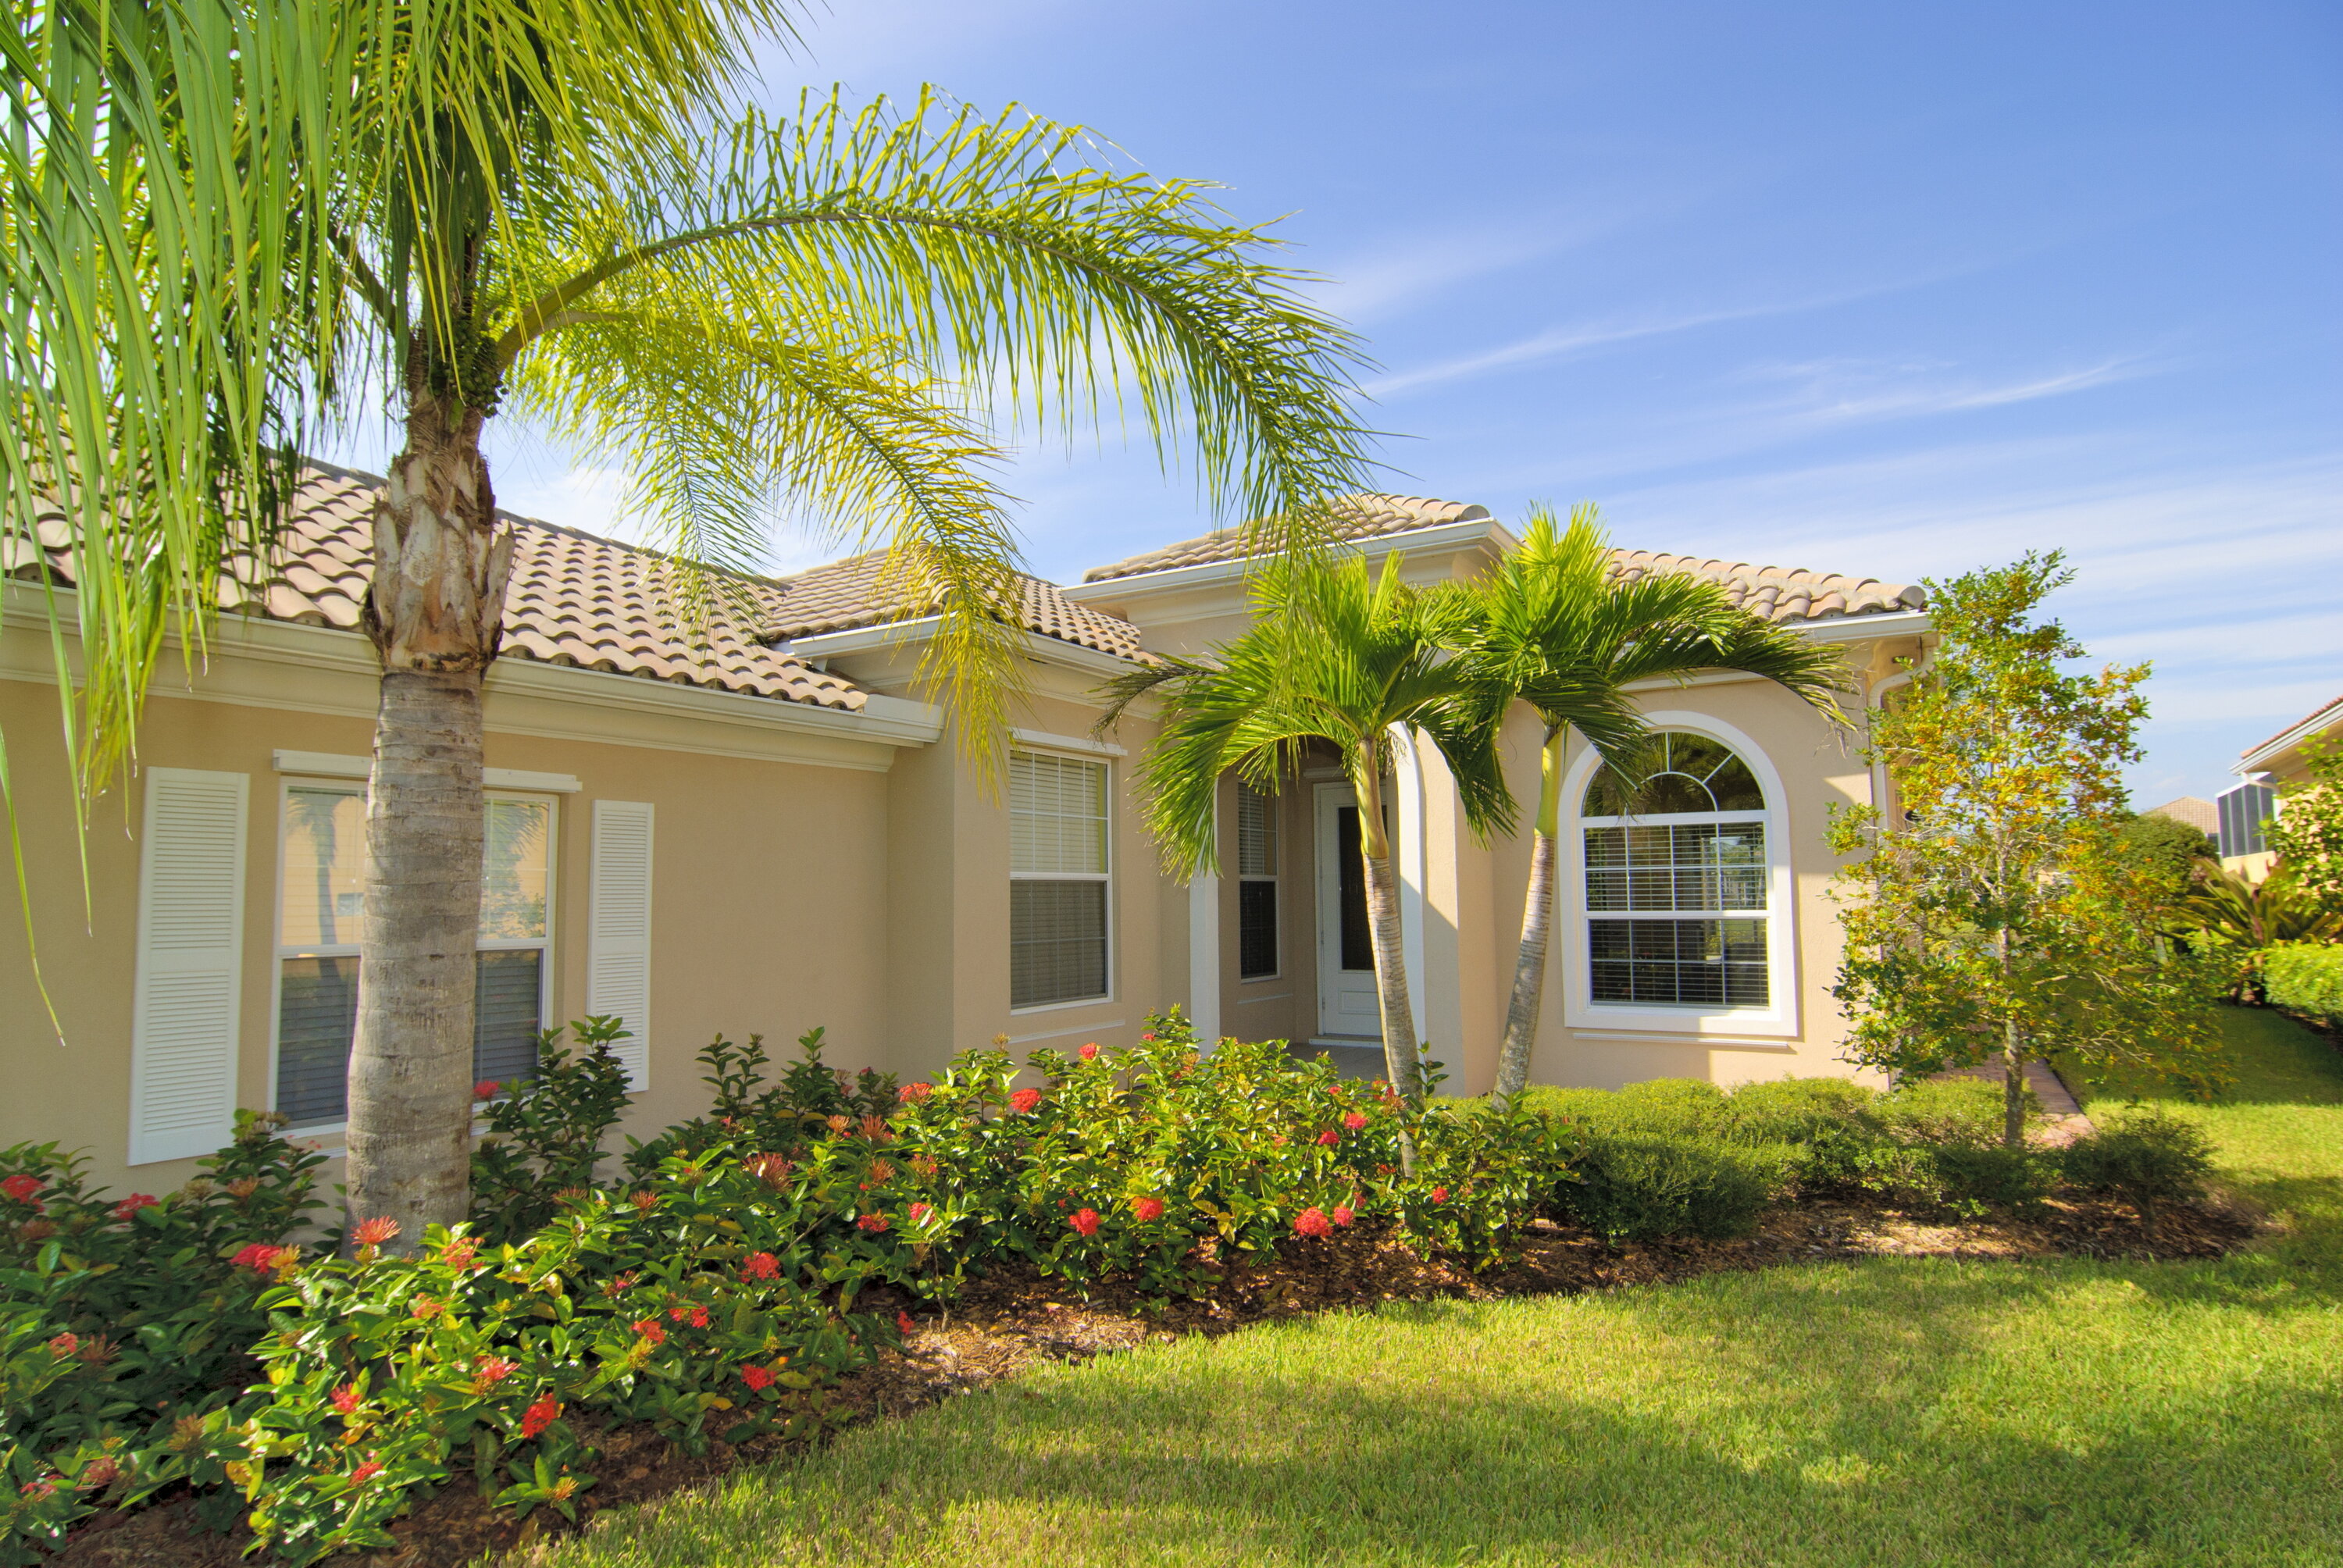 A beige one-story Floridian house with a light brown tiled roof, a well manicured lawn with tropical flower bushes and small palm trees